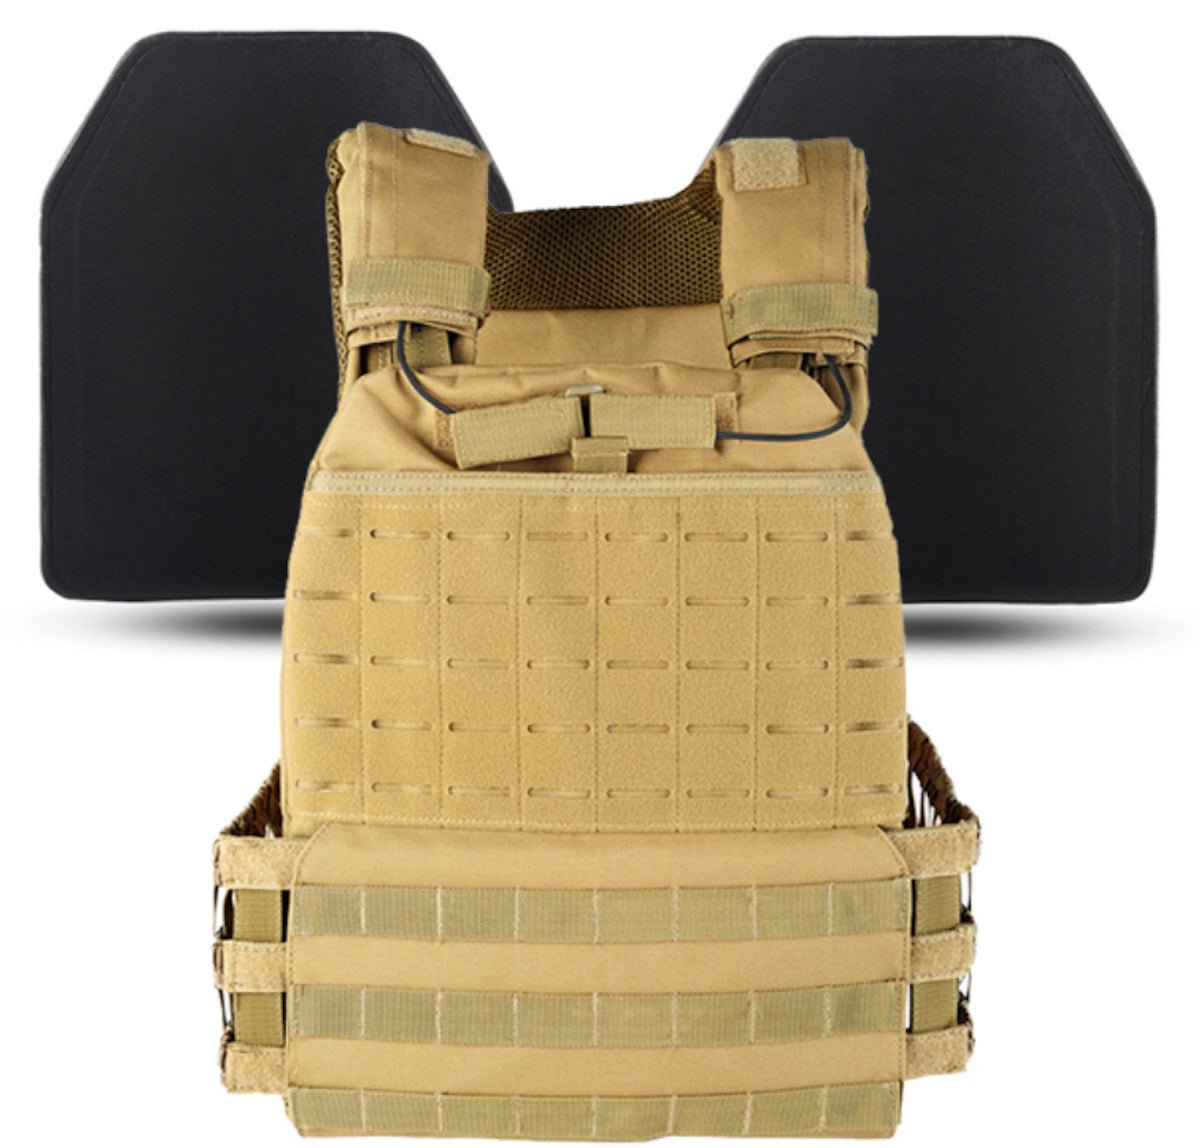 Pros and Cons of Tactical Weight Vests and Weight Vest Plates - Hyperwear